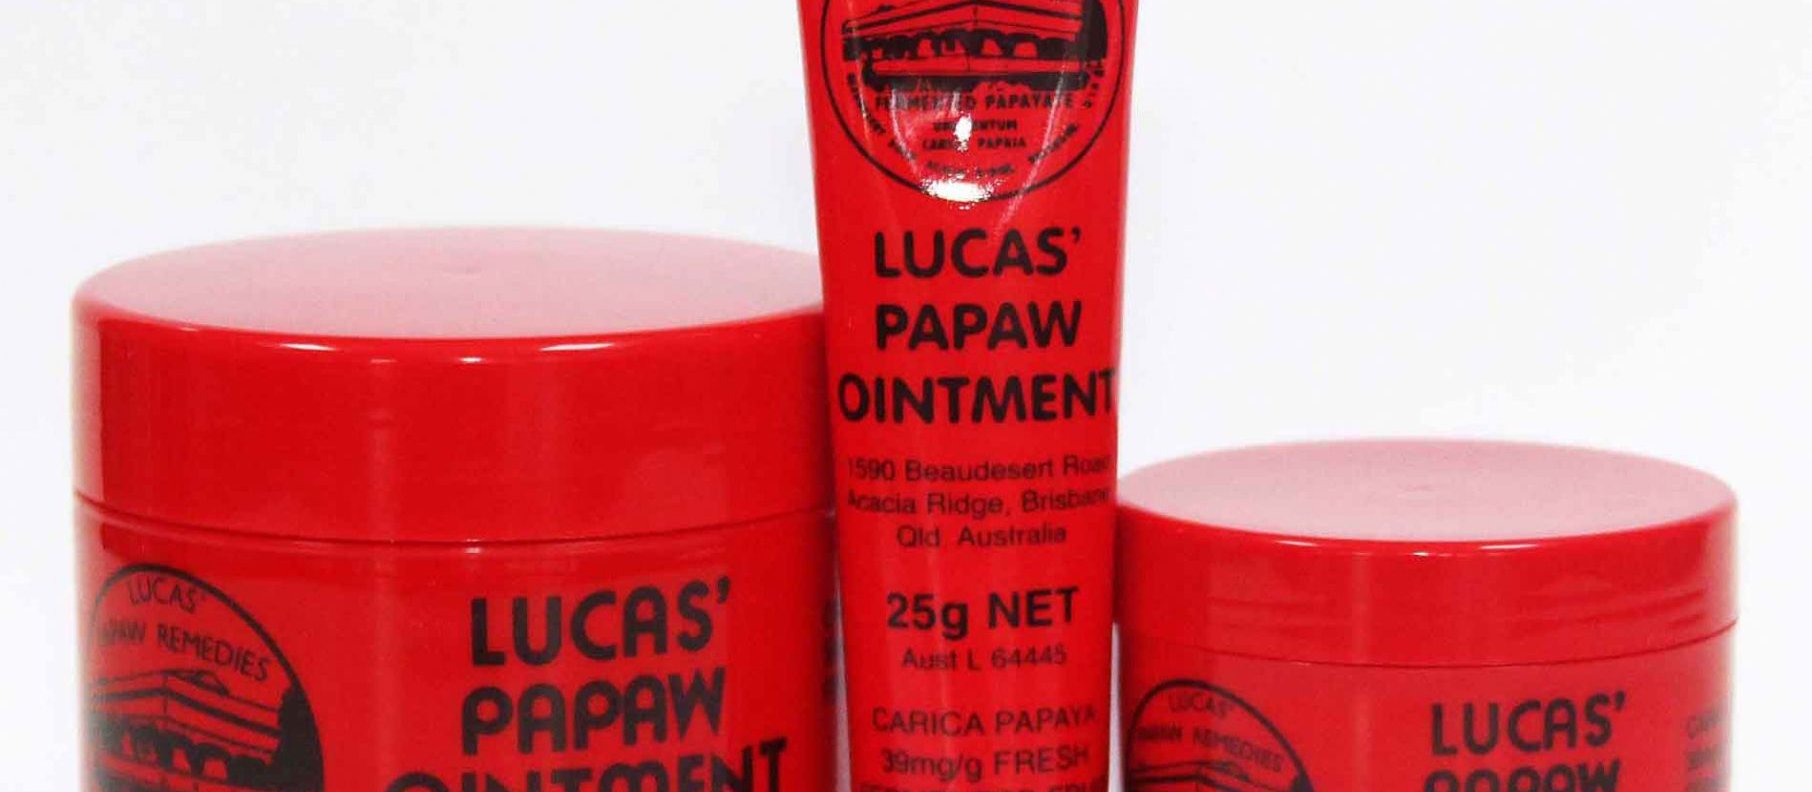 Lucas' Papaw Ointment recalled after 'contamination